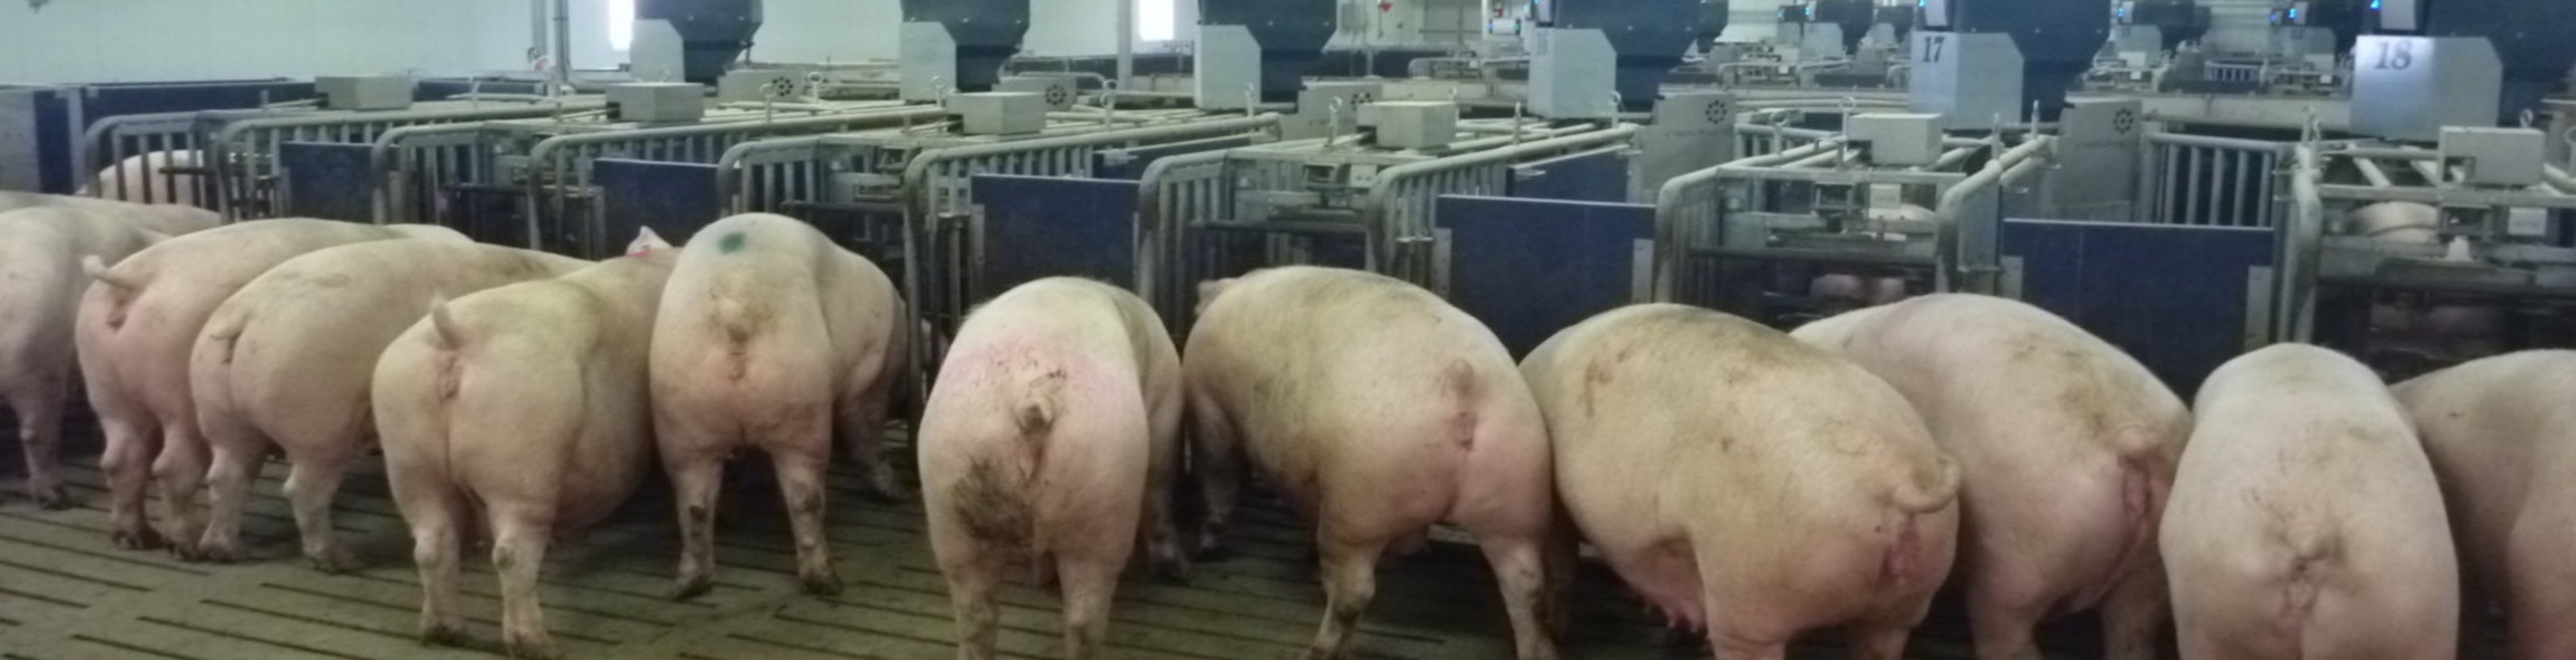 Pigs at electronic sow feeders